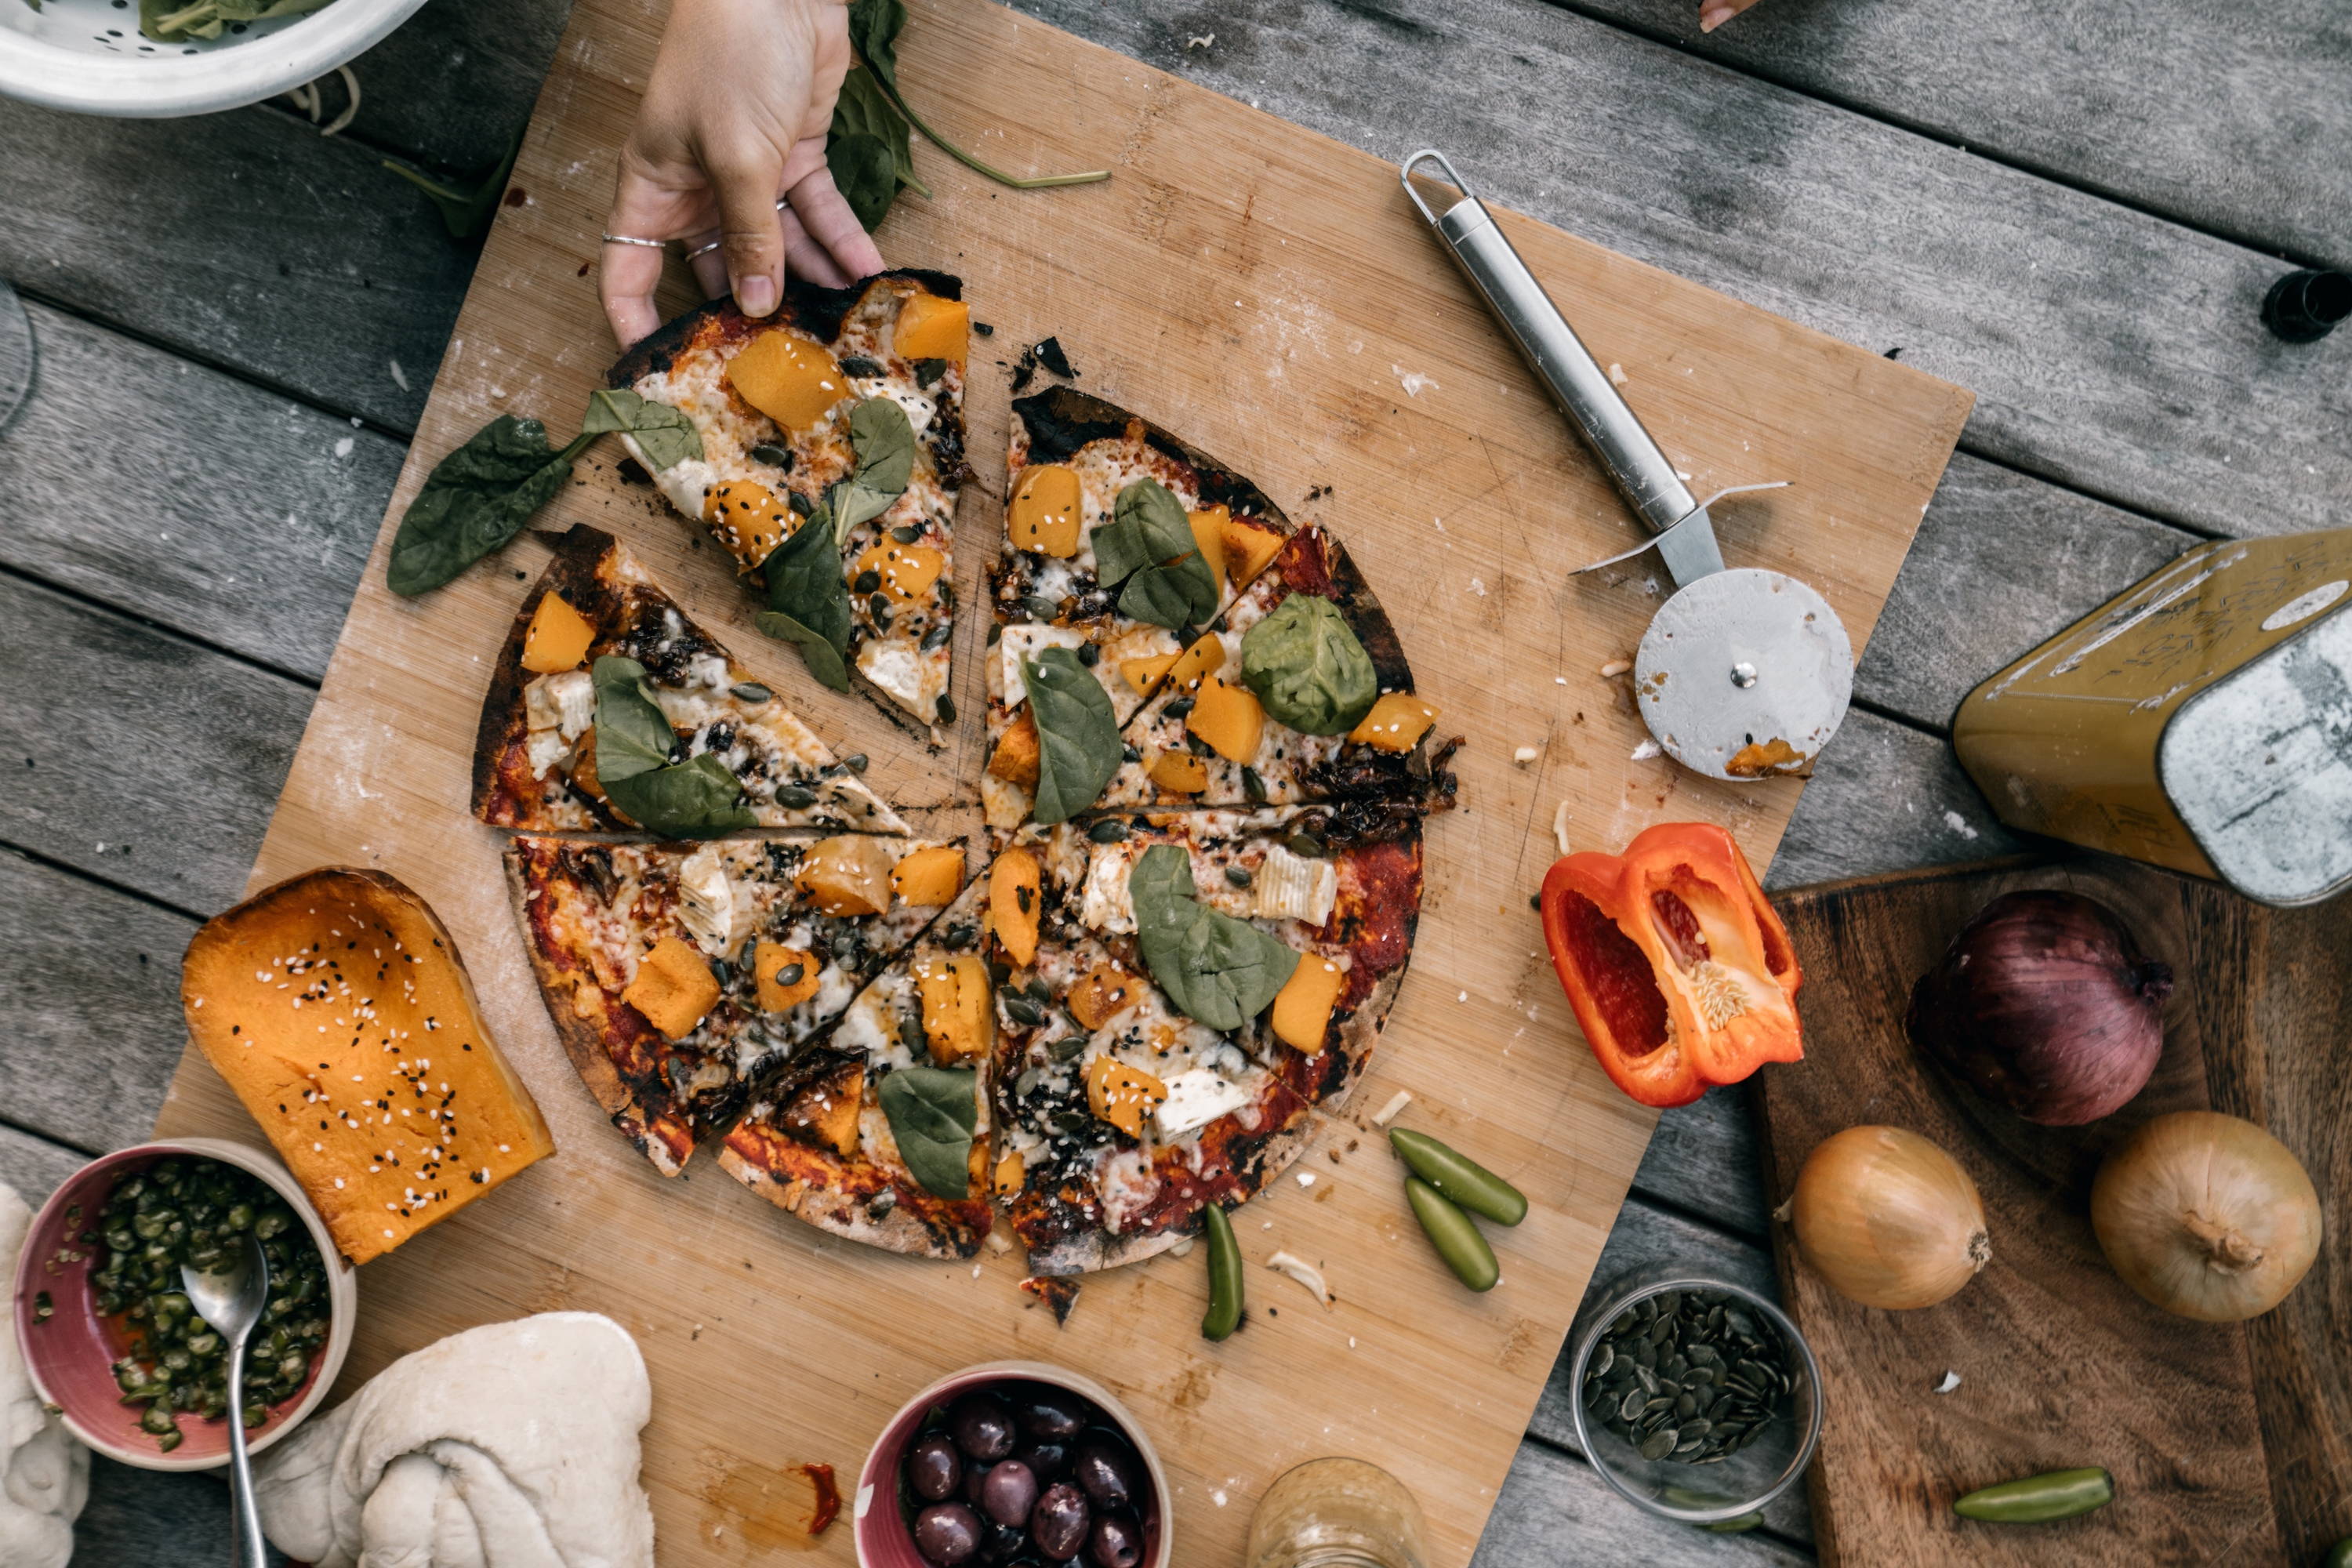 Italian style pizza topped with spinach and pumpkin to pair with Wild Kiss of Wine Dolcetto.